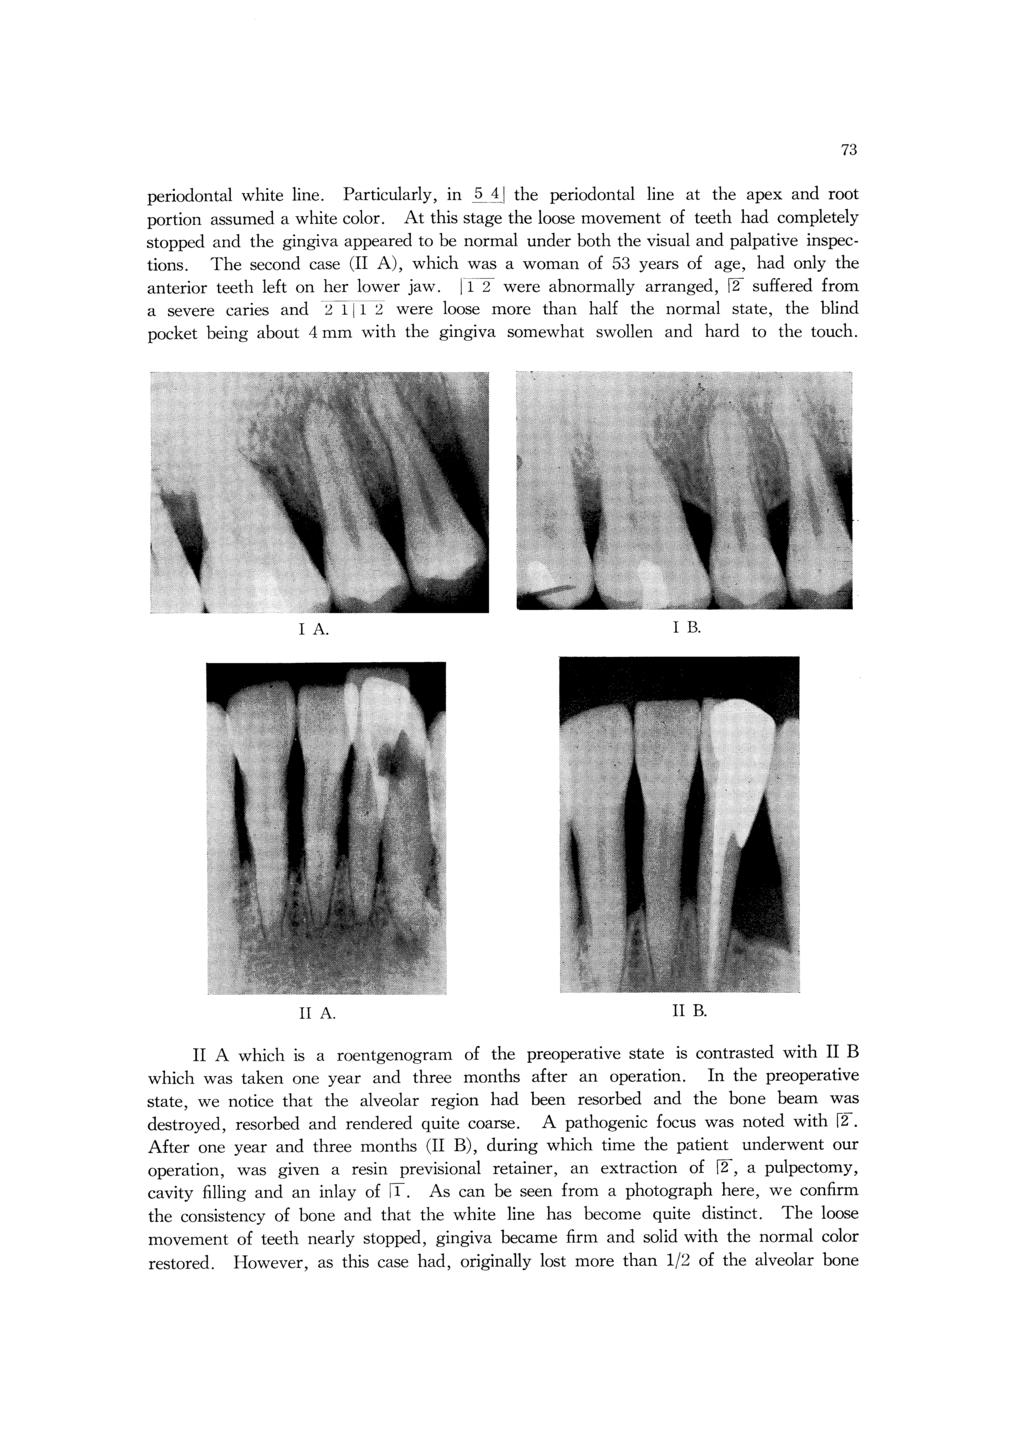 periodontal white line. Particularly, in 5 4 the periodontal line at the apex and root portion assumed a white color.